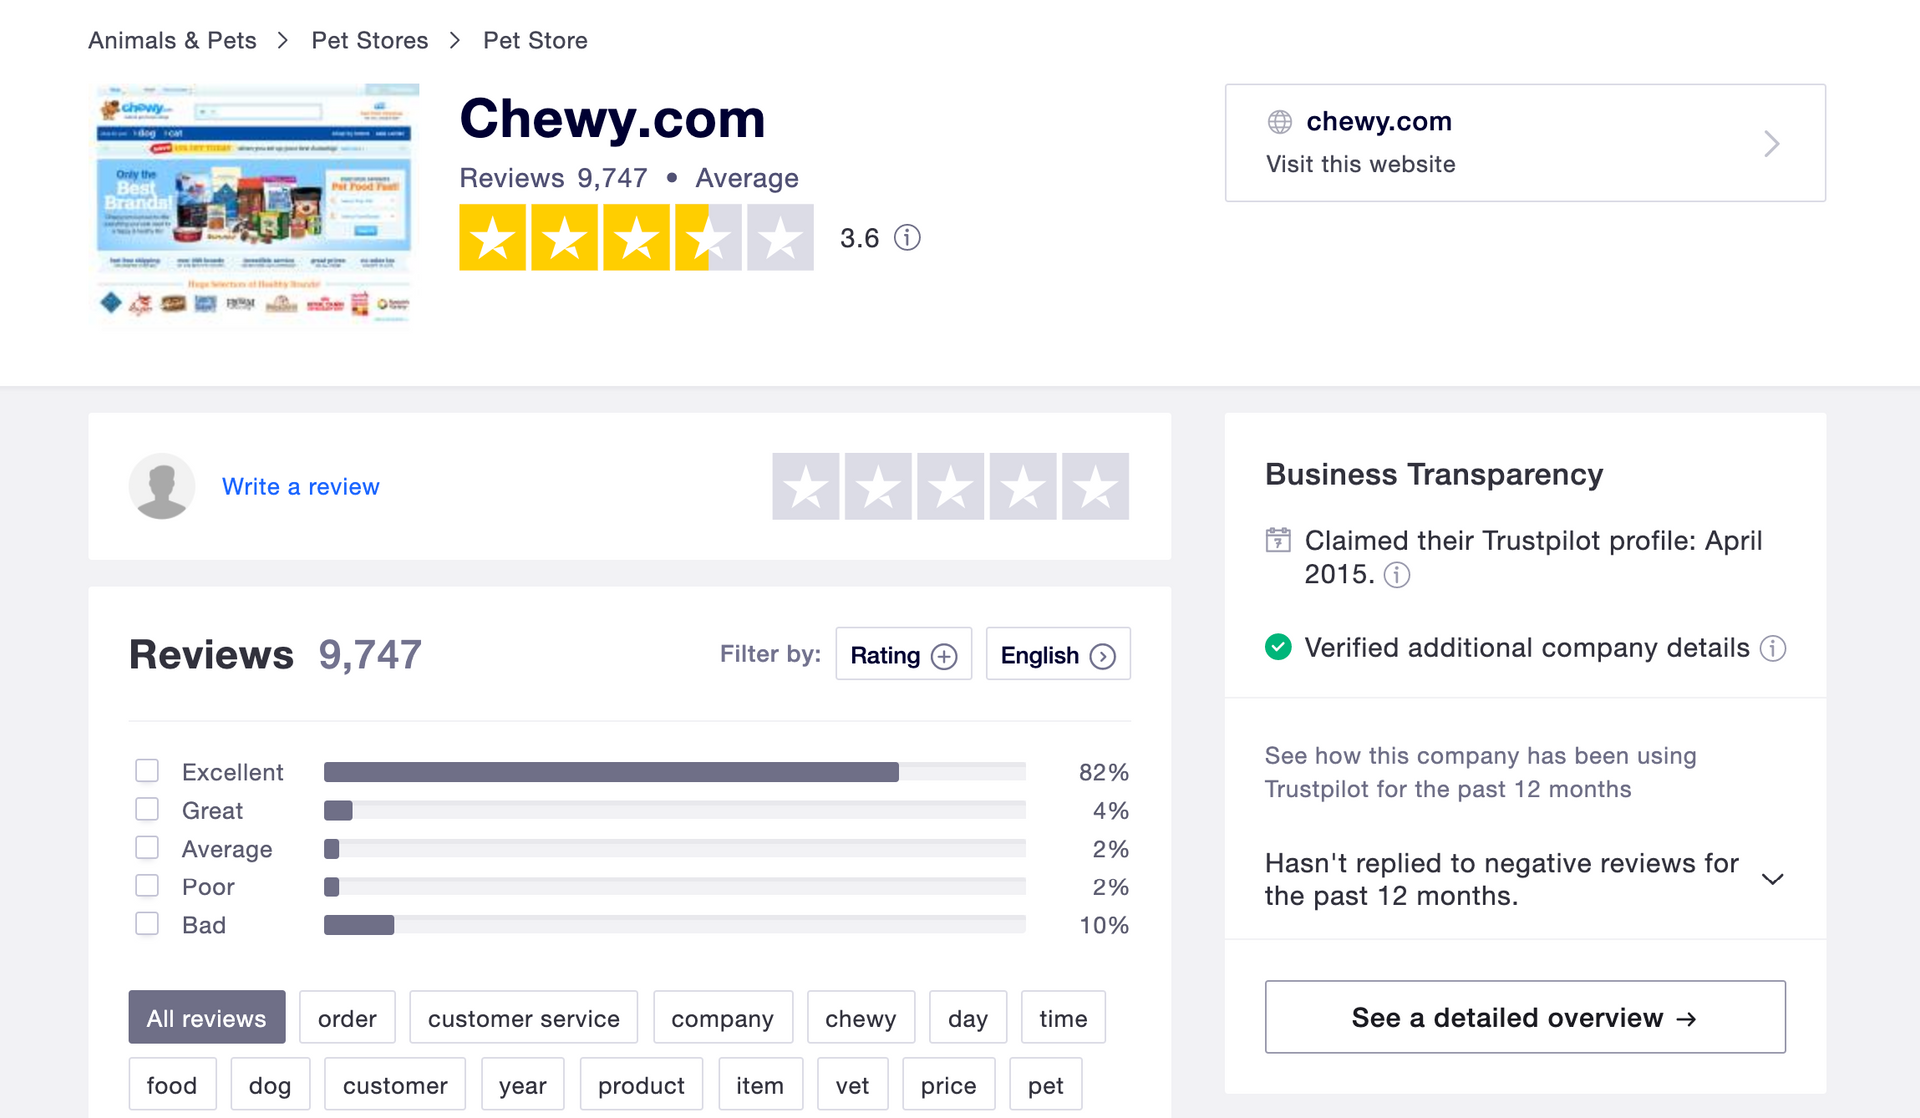 The overall star rating of Chewy reviews on Trustpilot: 3.6 star rating from over 9,000 reviews, with 82% leaving a score of 'excellent'.